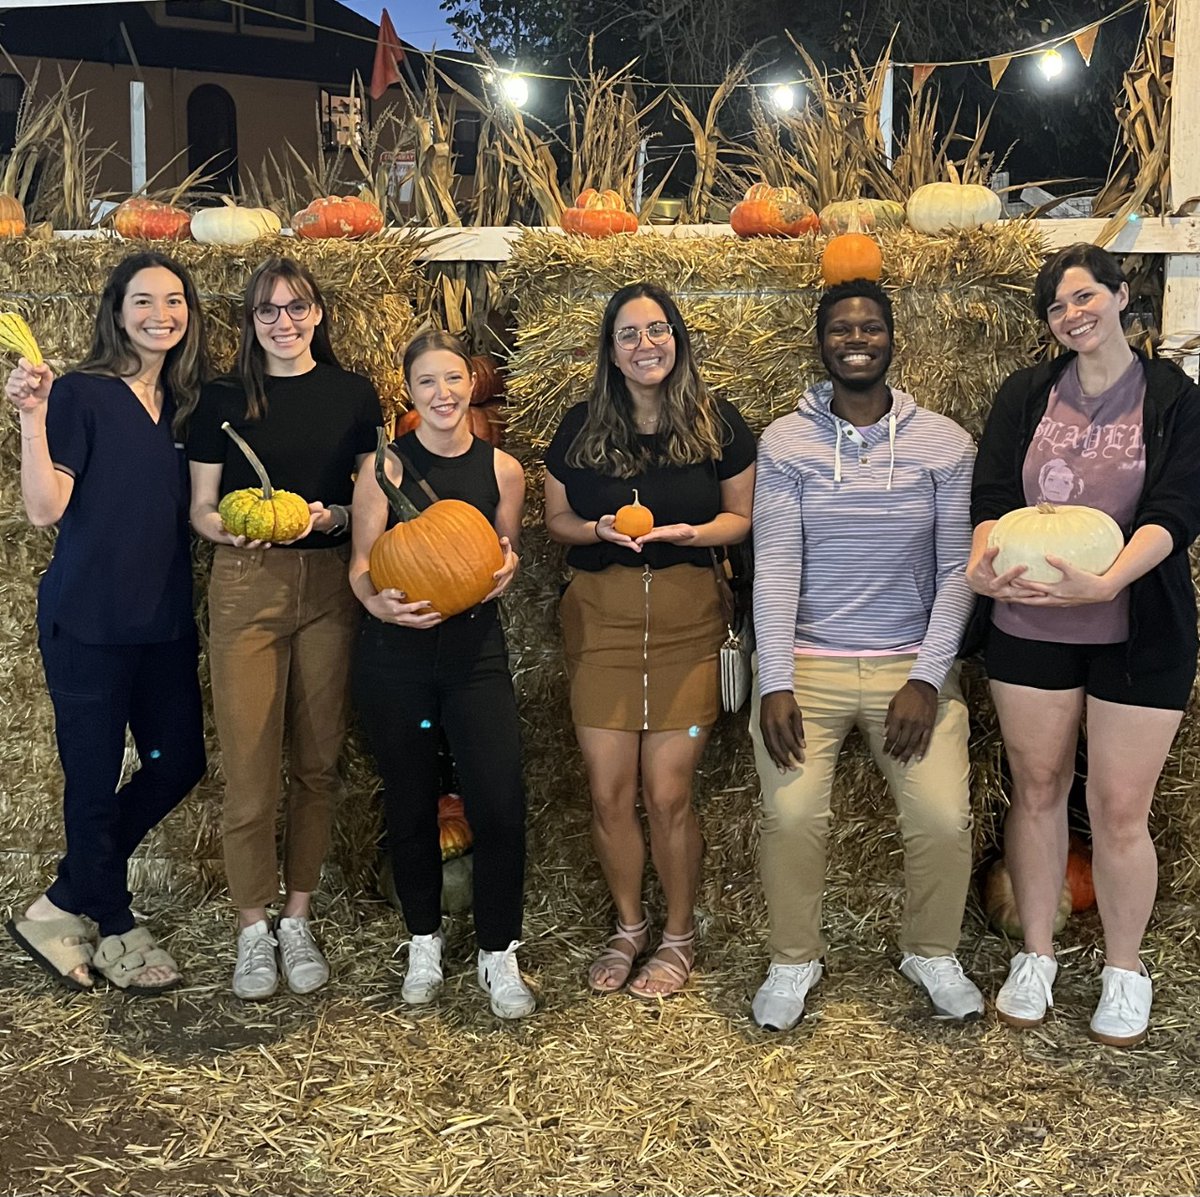 UCSF Neuro R1s enjoying some off time at the local pumpkin patch! #neurotwitter #UCSF